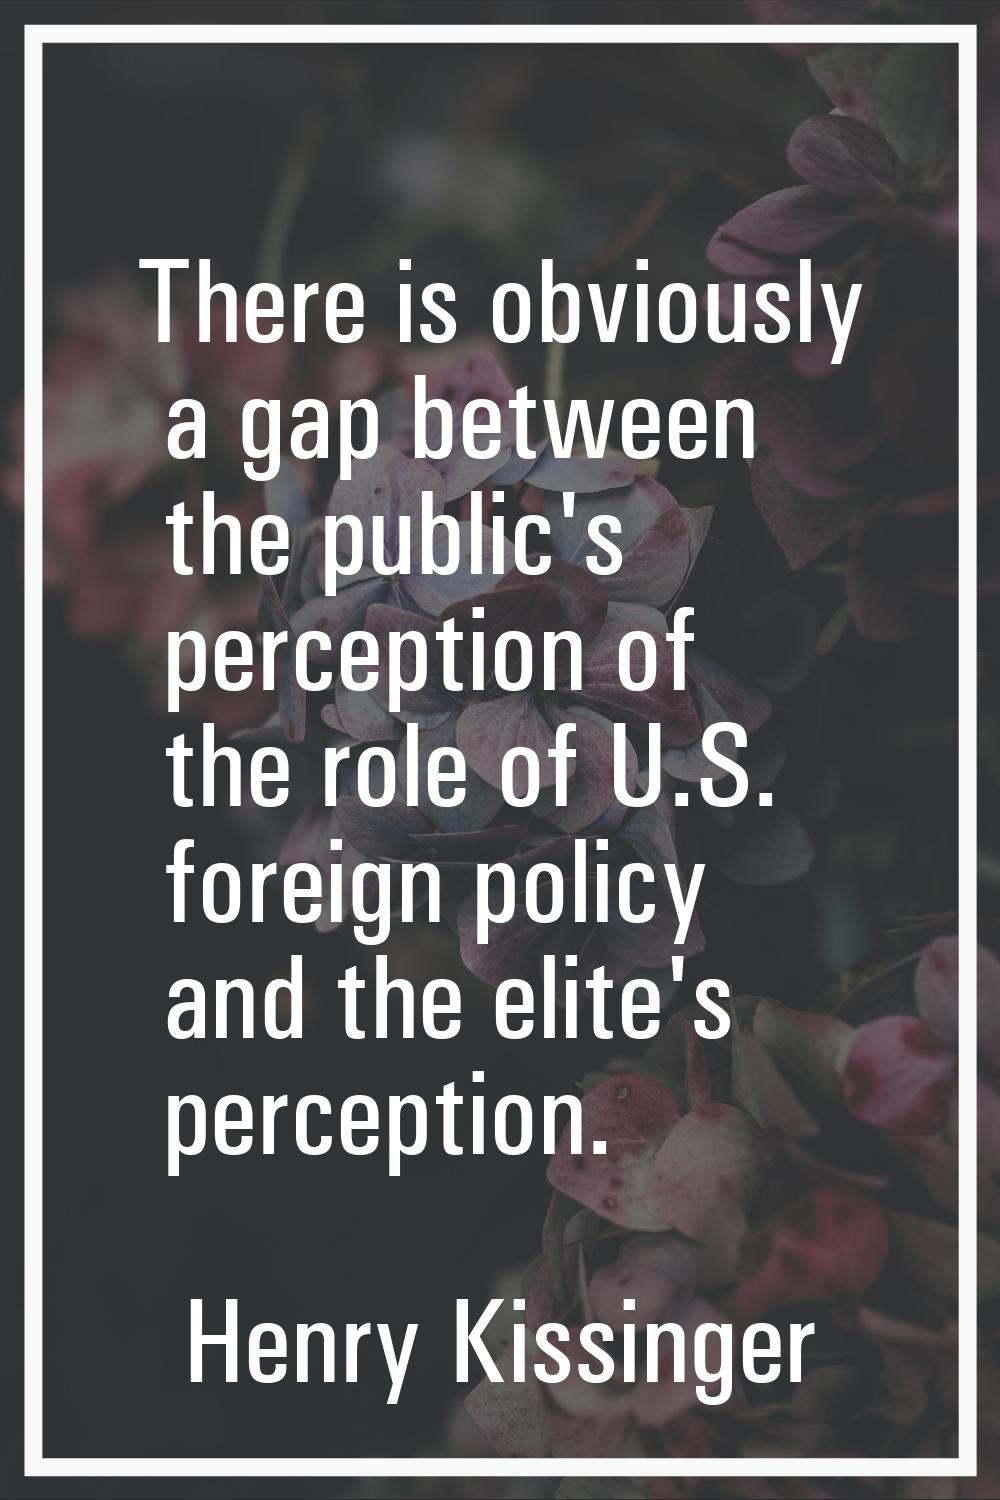 There is obviously a gap between the public's perception of the role of U.S. foreign policy and the